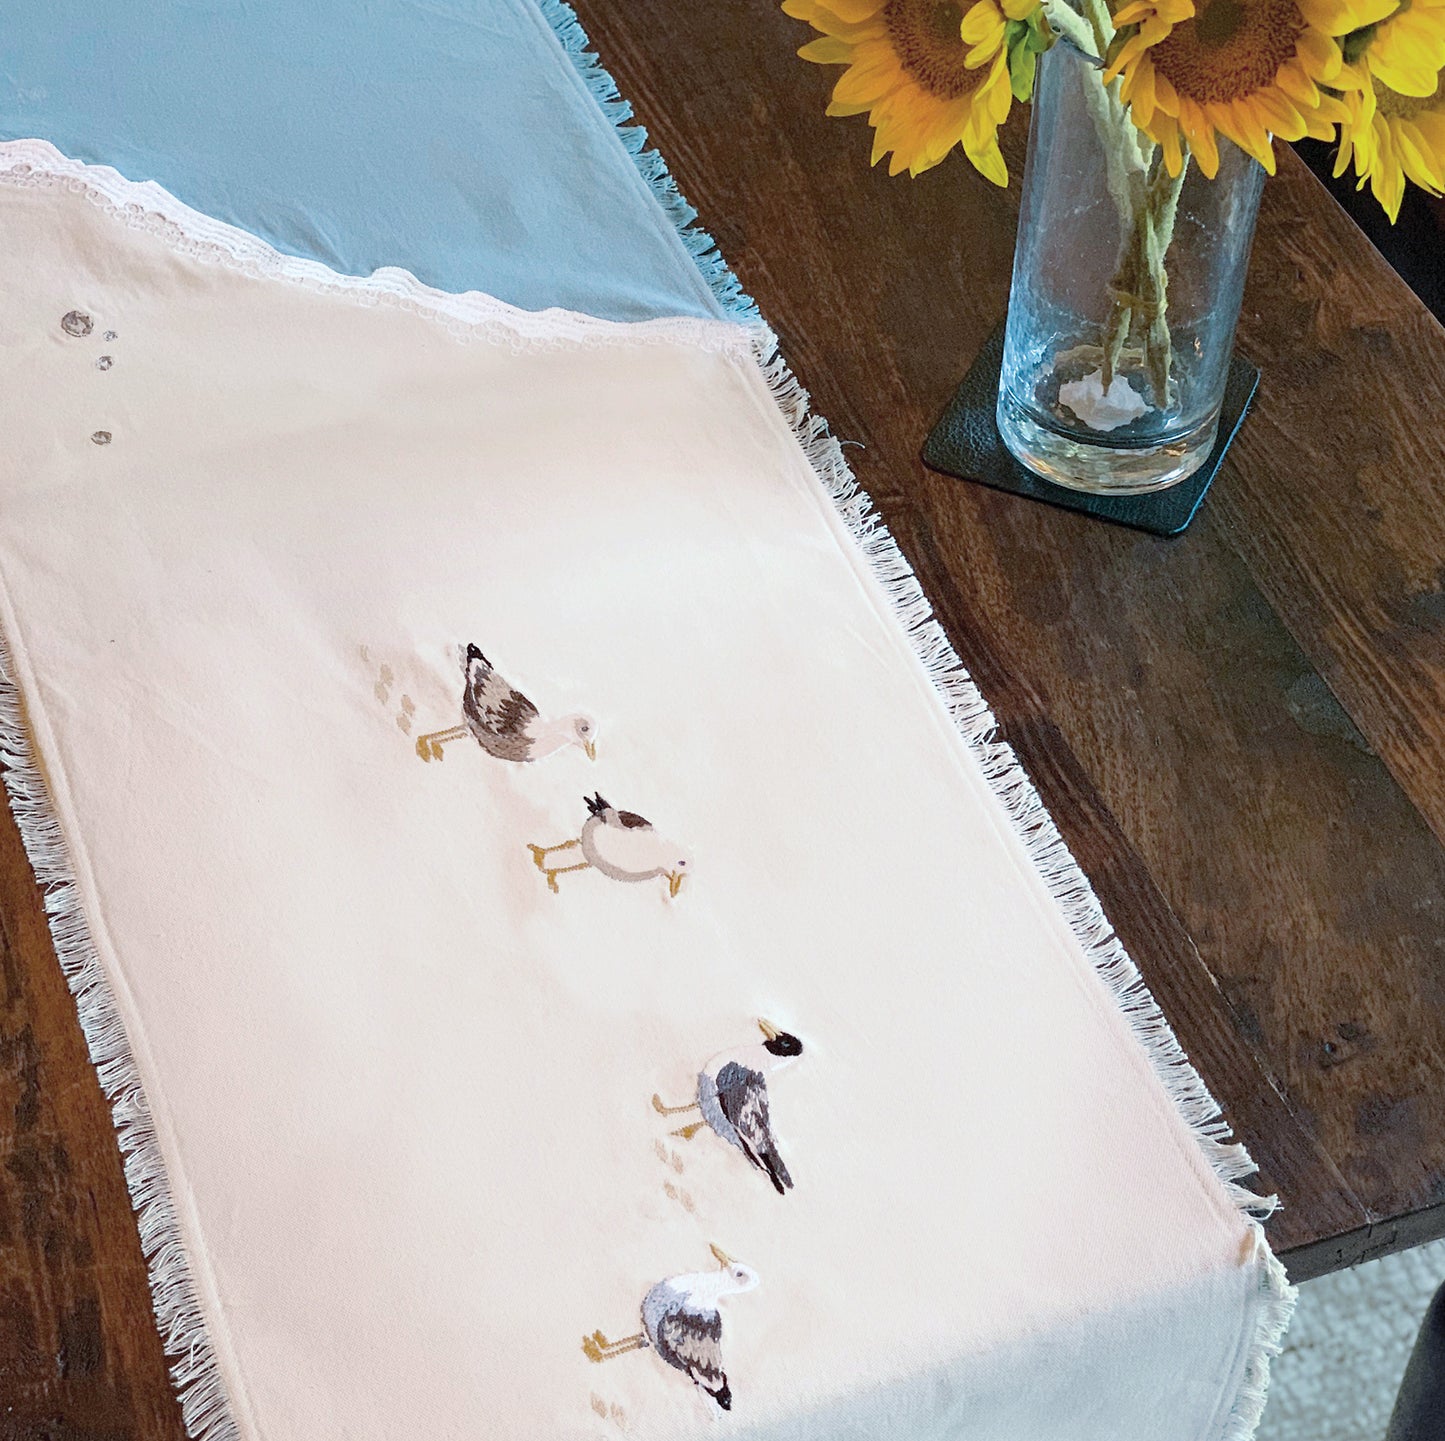 Sea gulls embroidered on a cotton fringed table runner featuring blue waves on sand. Linens are sitting on a wooden table.